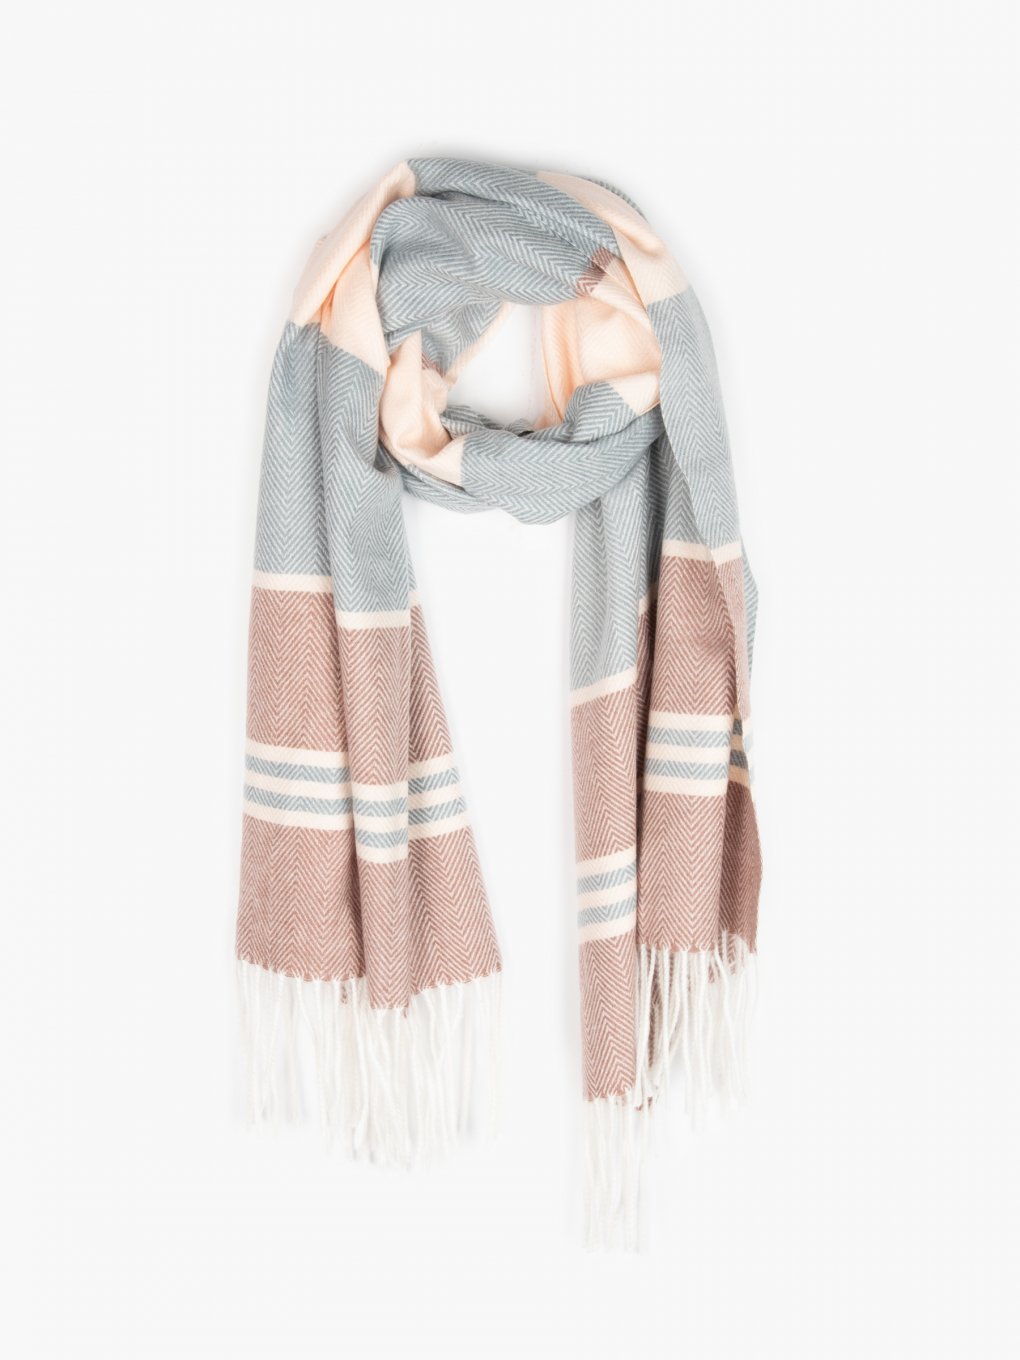 Stripped scarf with tassels